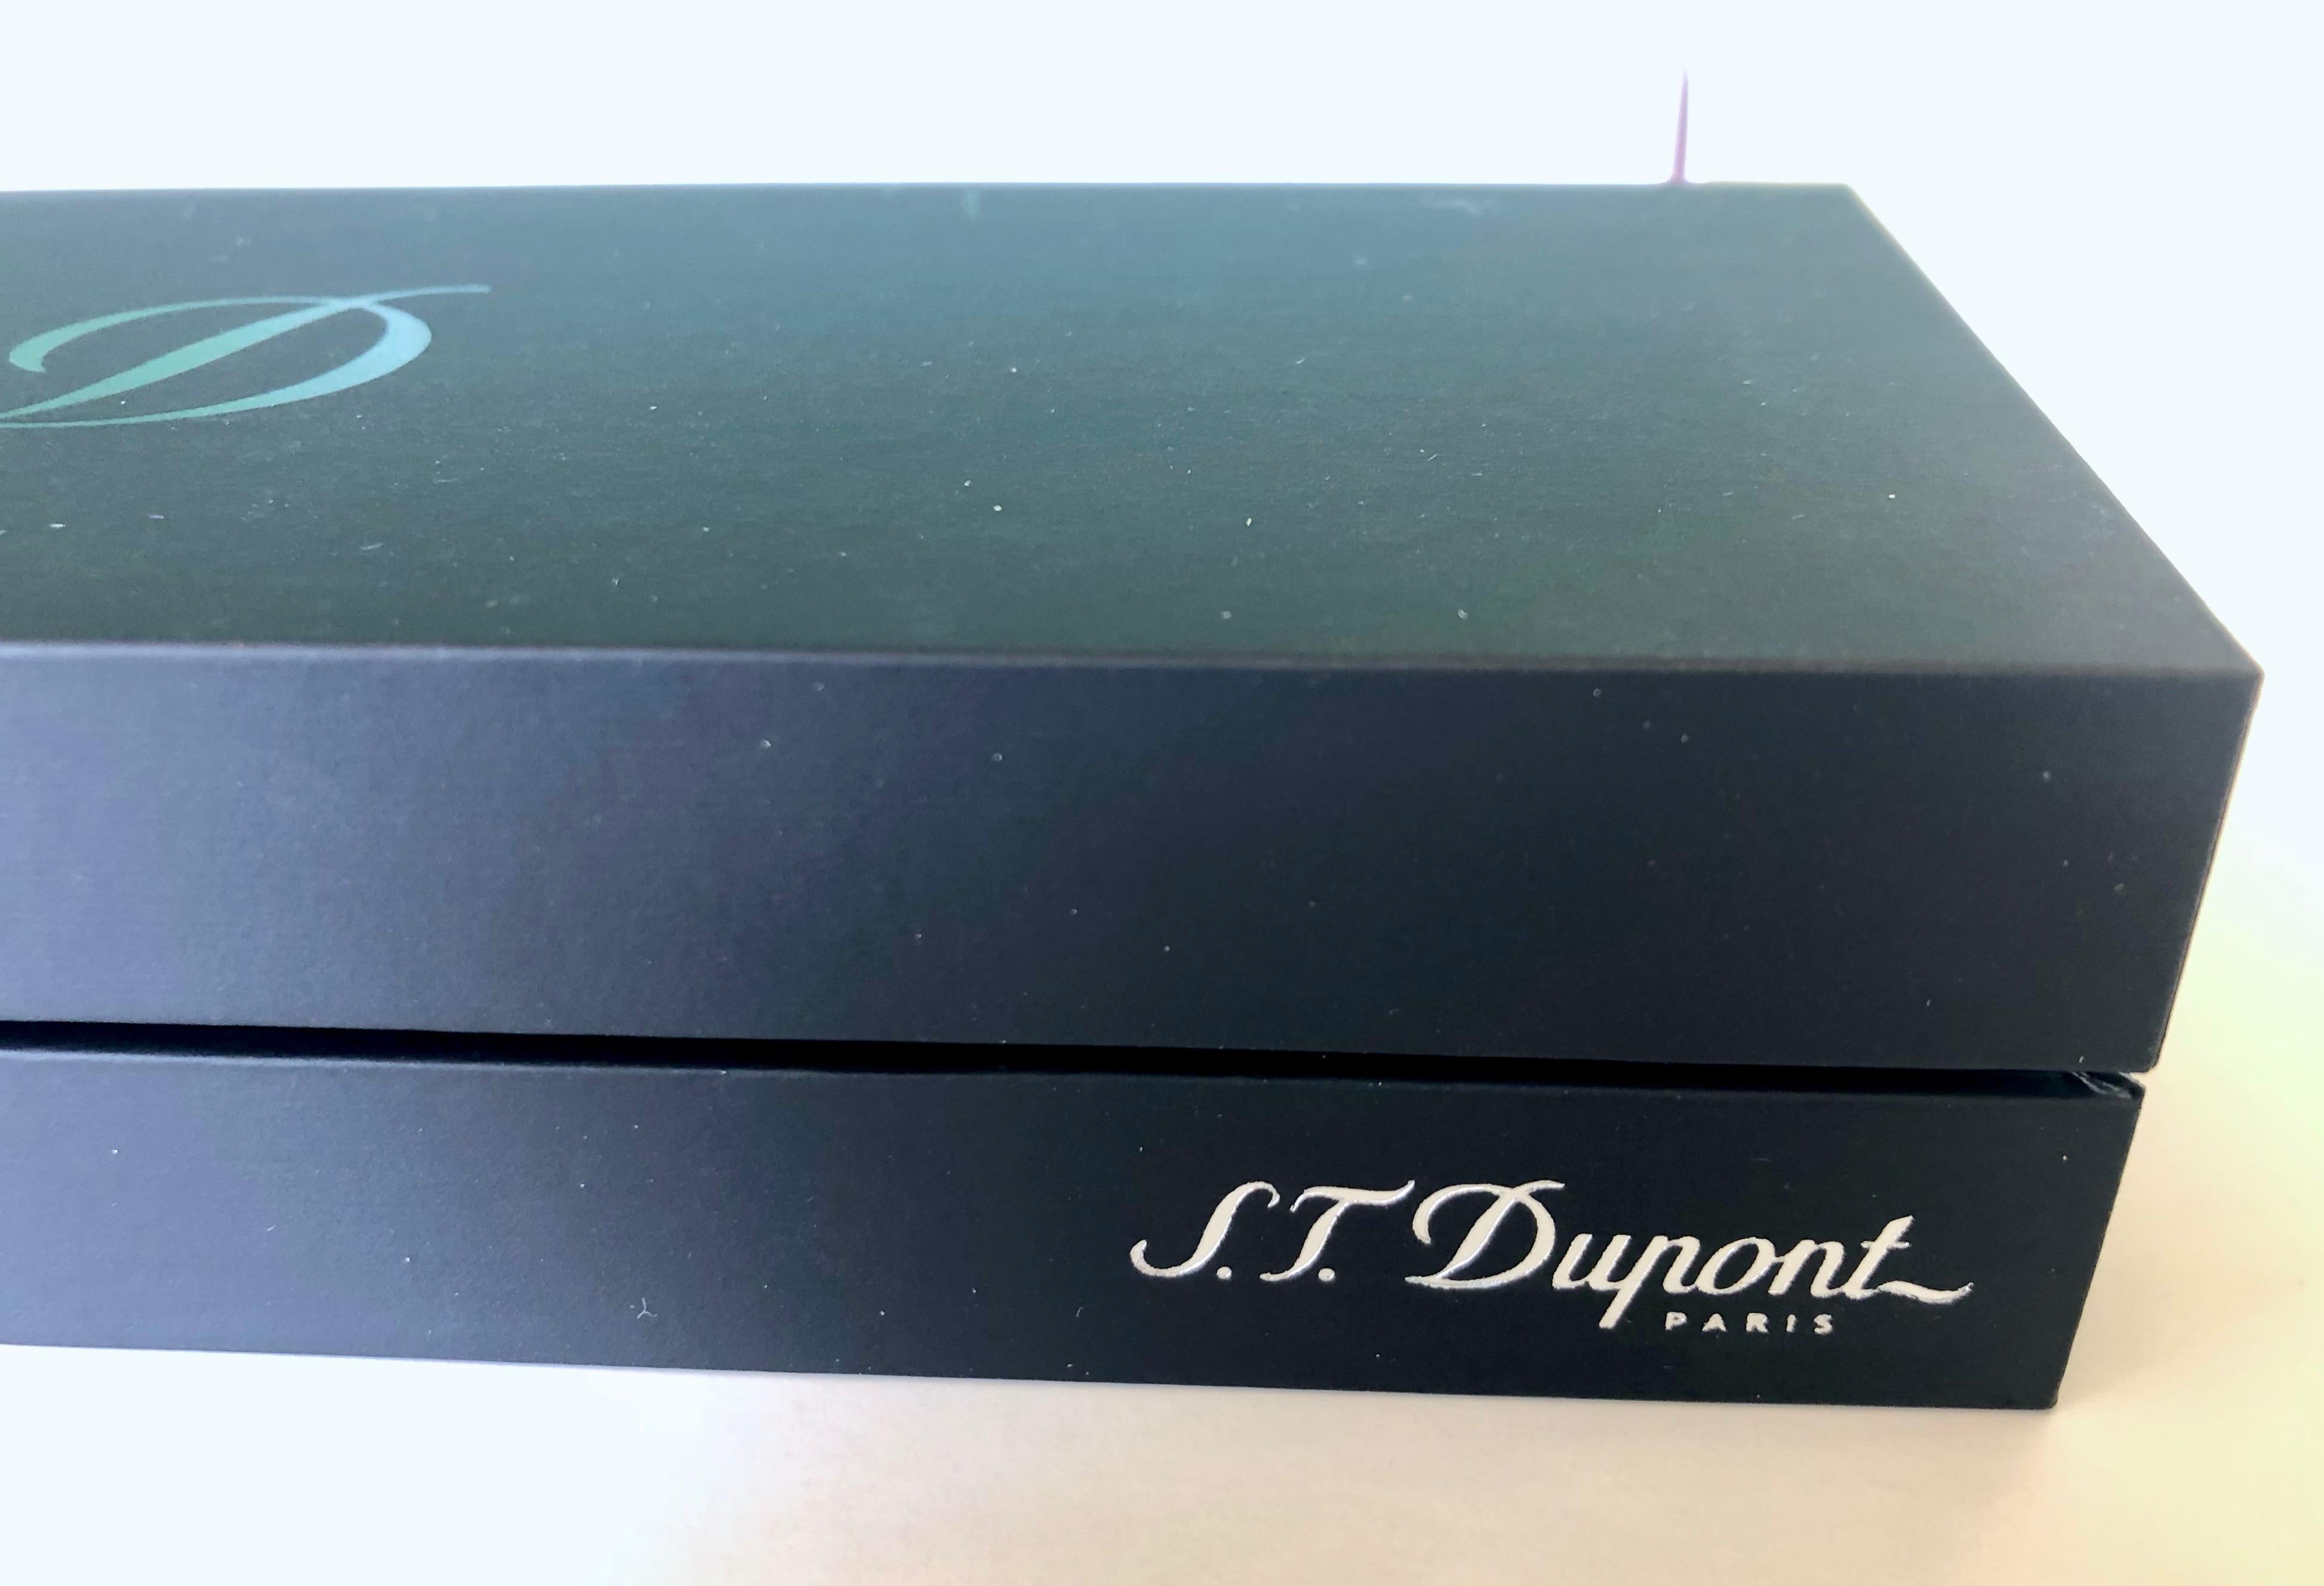 S.T. Dupont Paris Olympio Brand New Large Solid Silver Ball Point Pen in Box 3